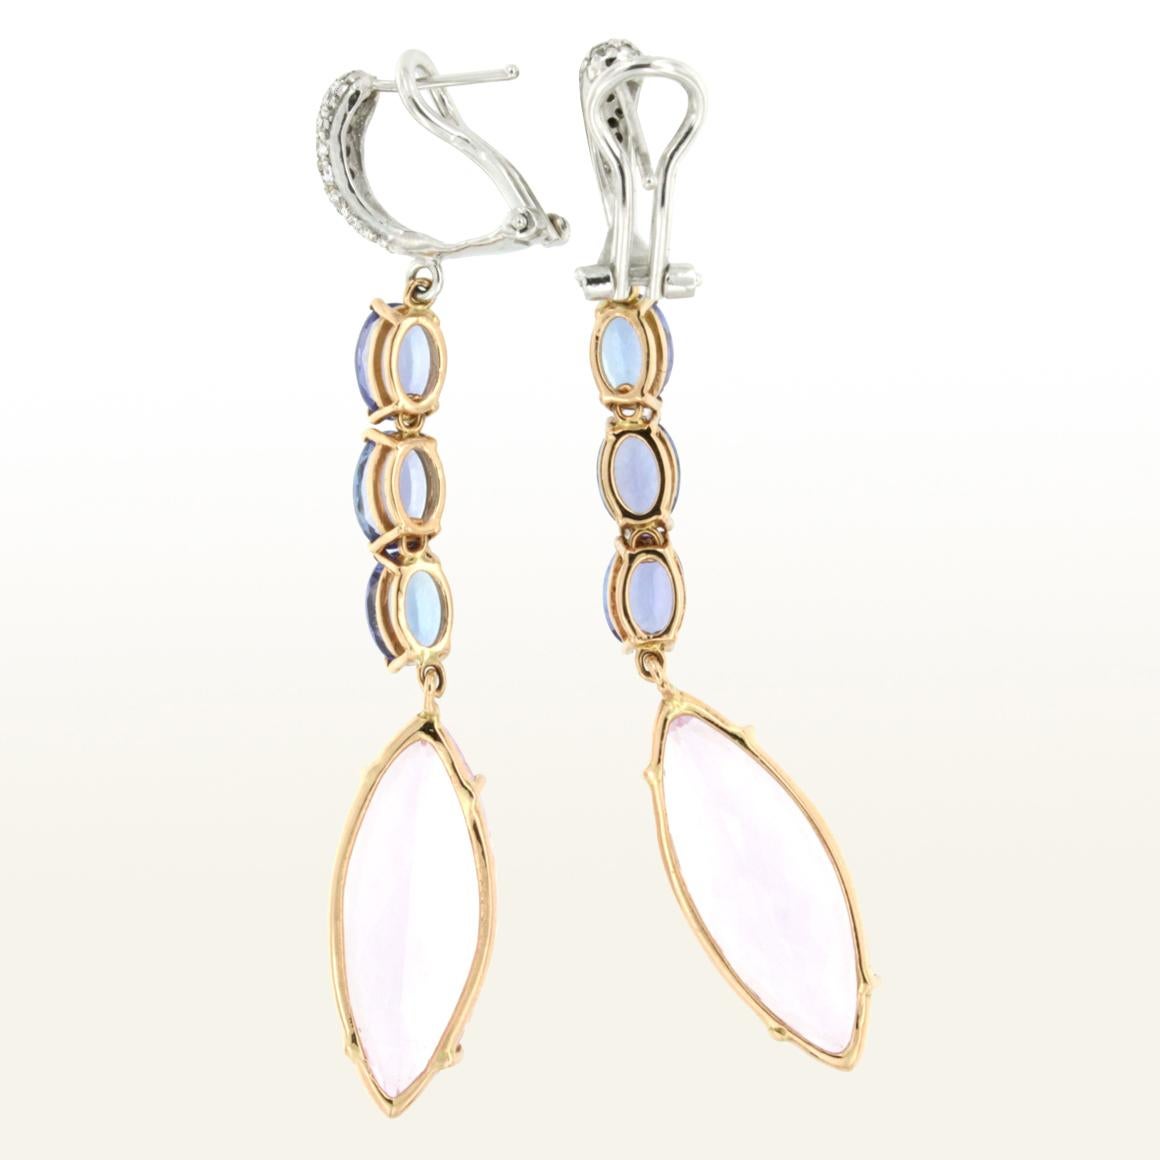 Amazing earrings by Stanoppi Jewellery . The unique and bright colors of the Tanzanite and Kunzite natural stones make this set a unique and unrepeatable piece. These earrings has an straordinary elegance and unique design . Handmade in Italy by